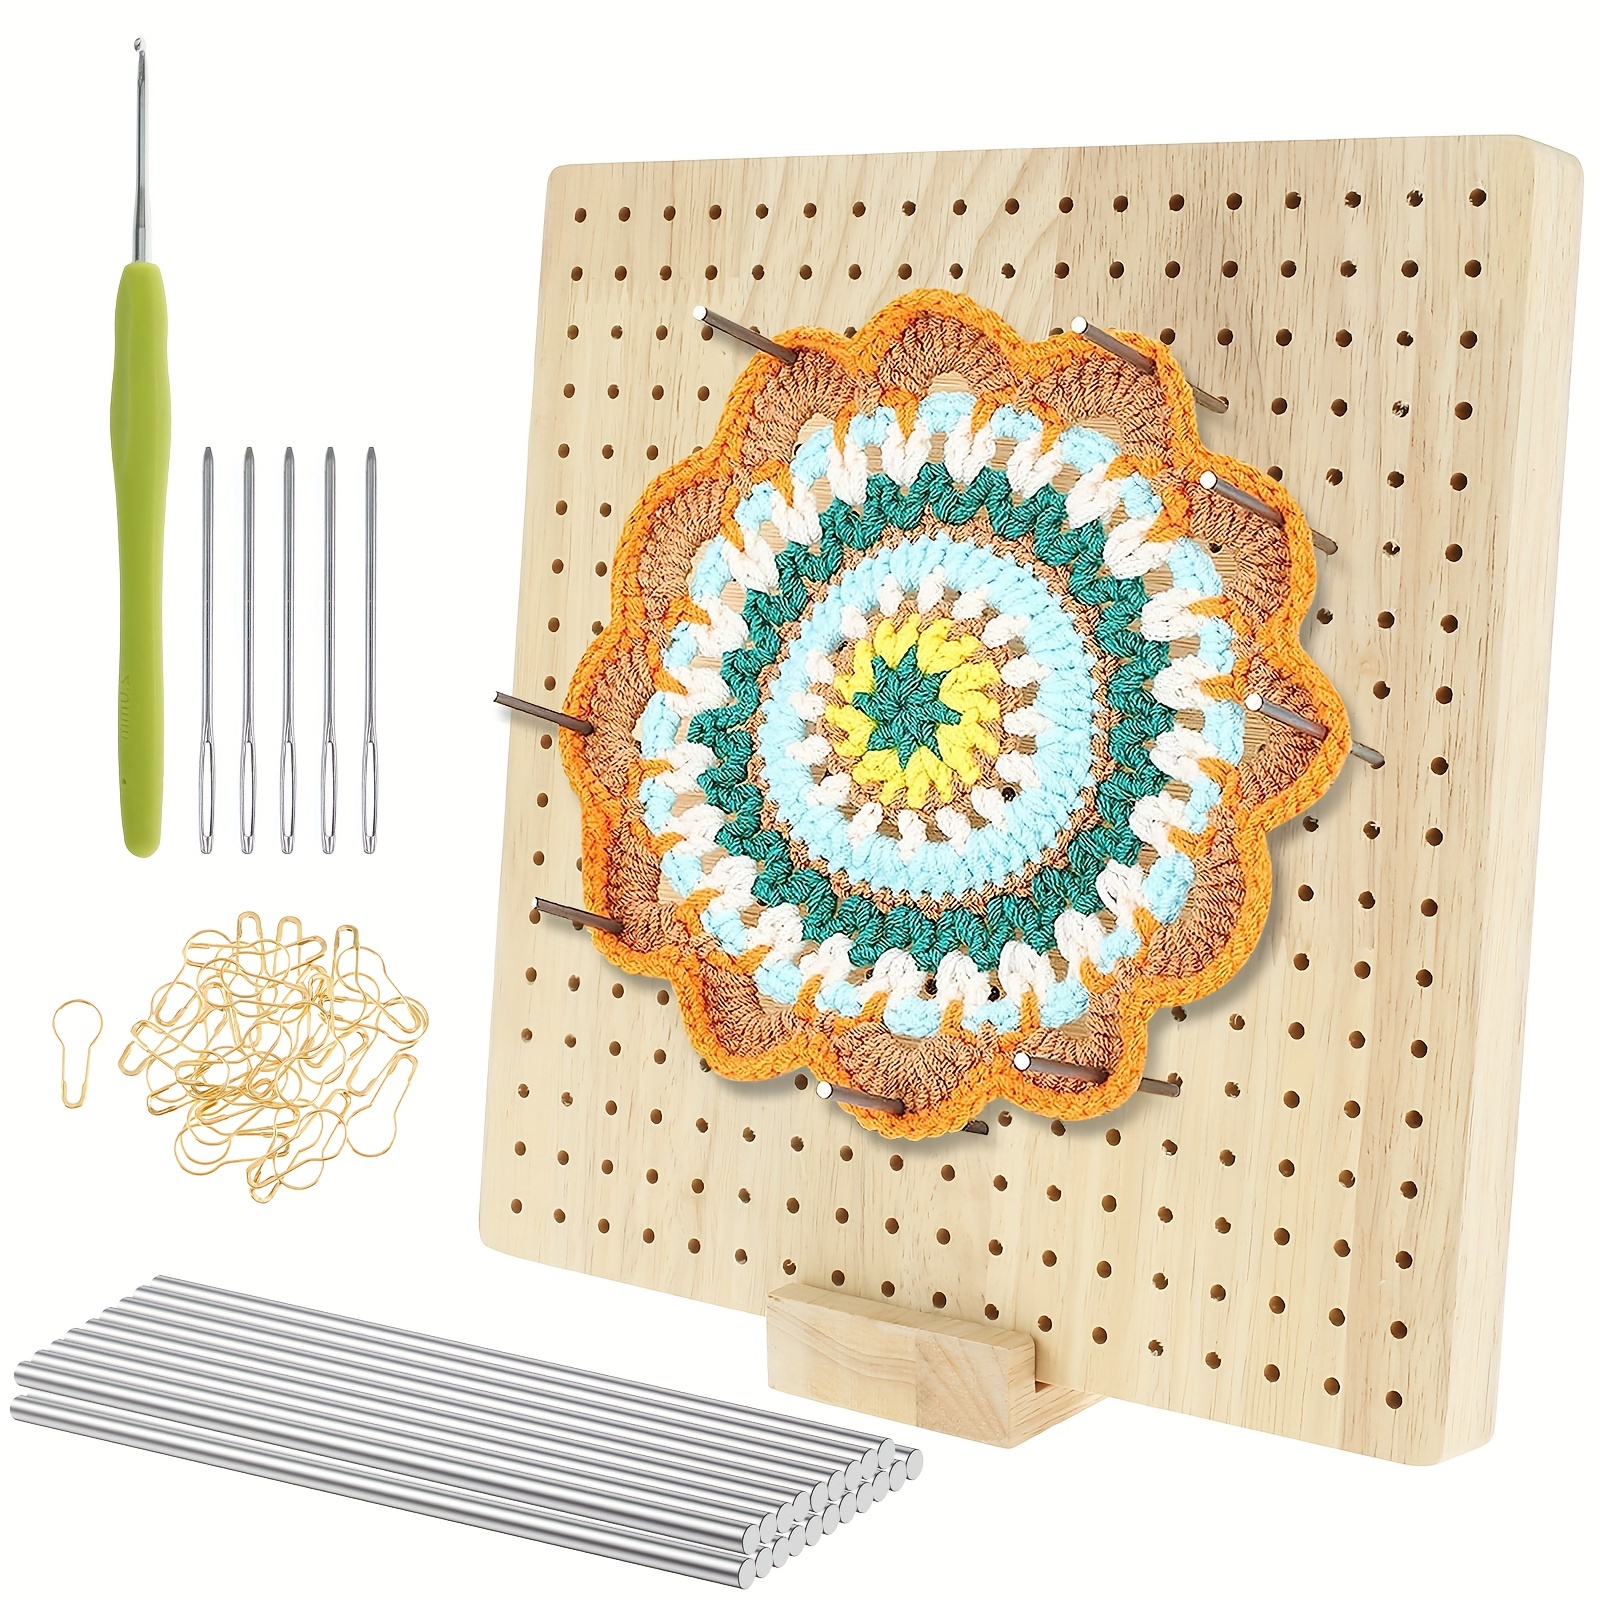 9.25 Inches Rubber Wooden Crochet Blocking Board Crochet Accessories with  20 Pcs Steel Pins for Knitting Crochet and Granny Squares Blocking Board  for Crochet Knitting and Crochet Projects Wood(9.25in)